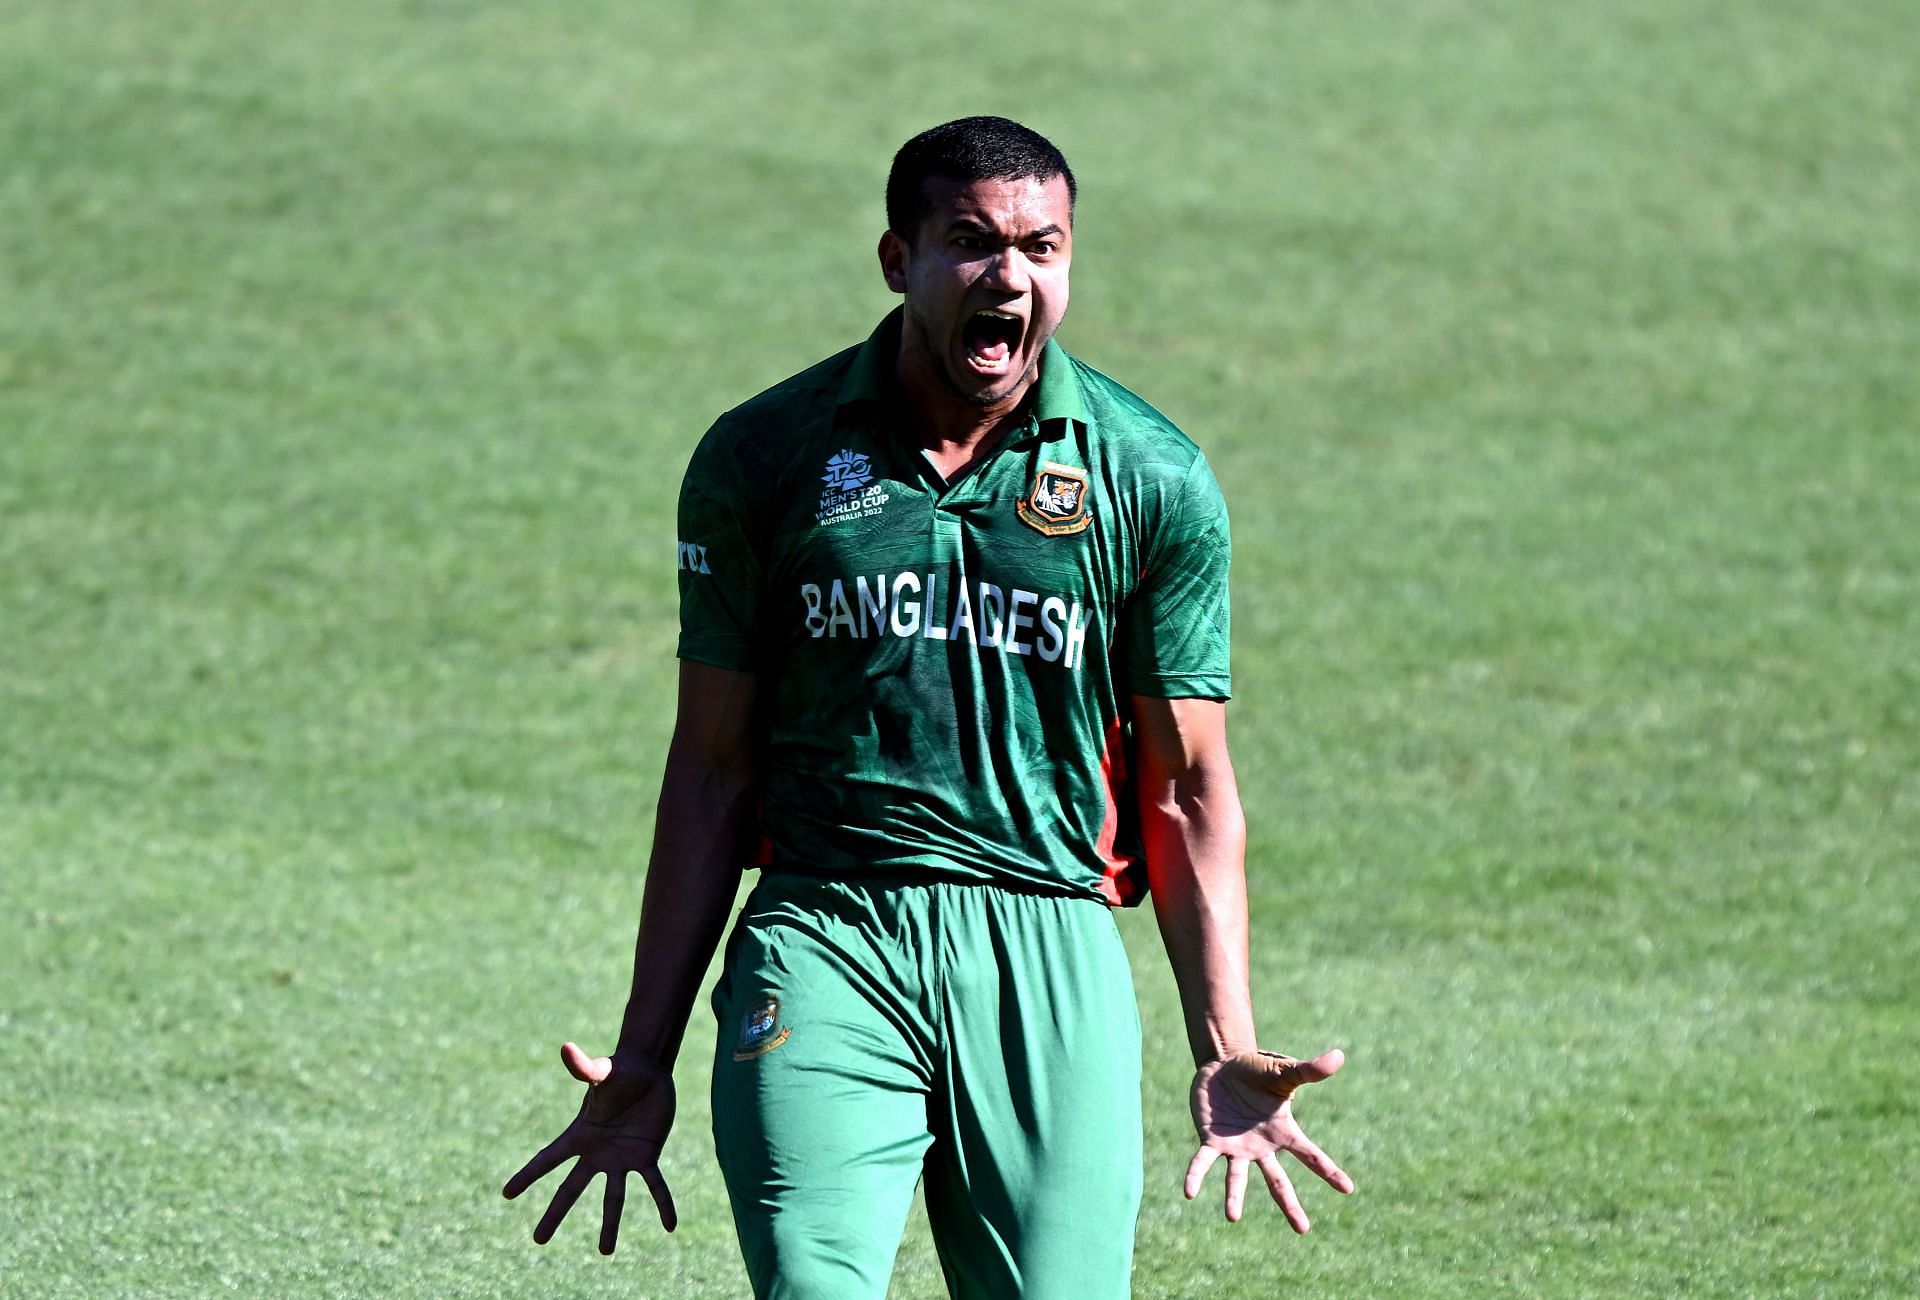 Taskin Ahmed too had to suffer in the Bangladesh Premier League.